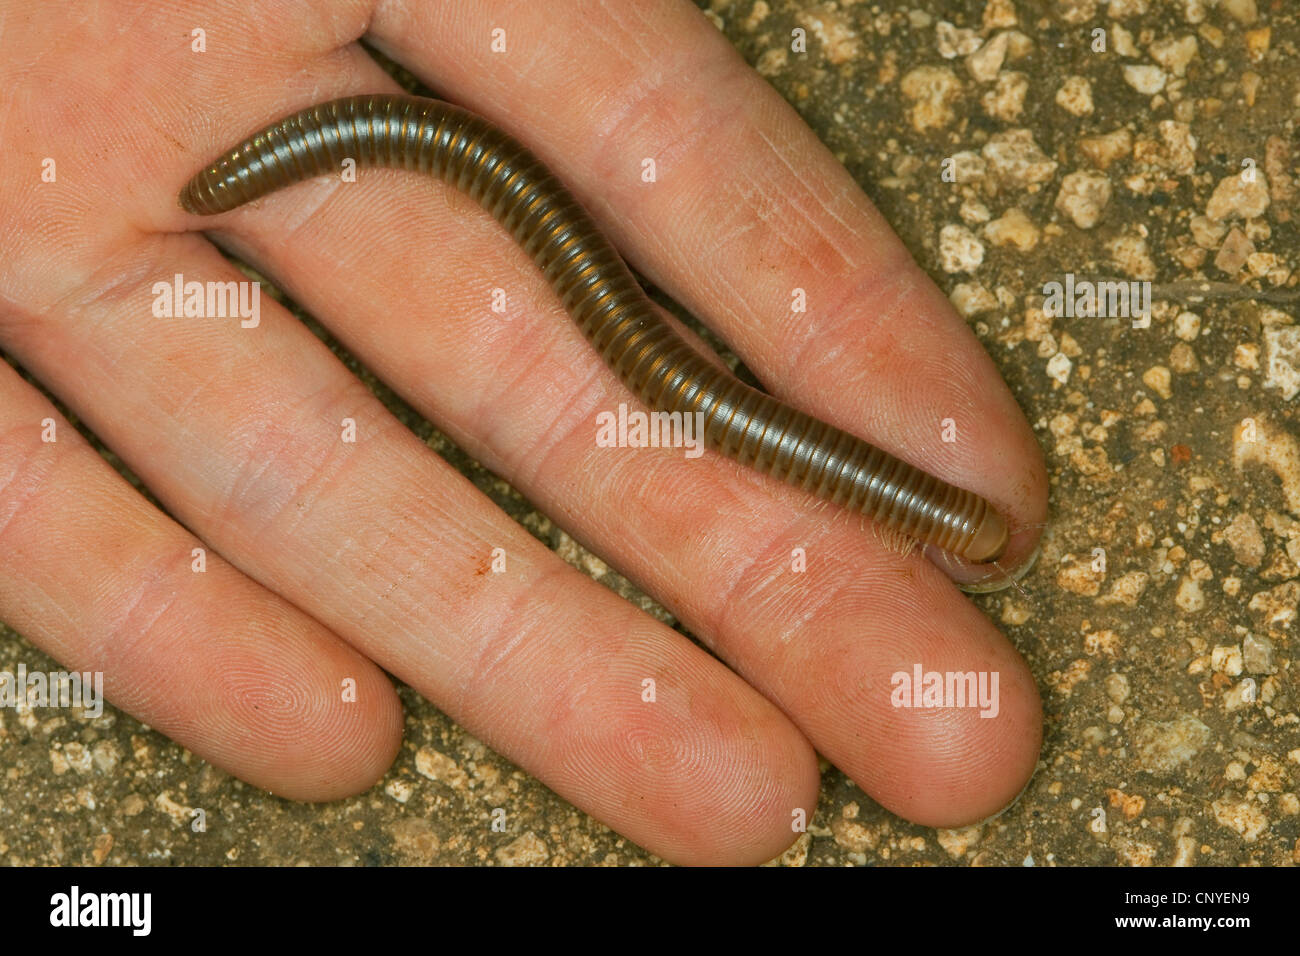 millipede, millepede, thousand-legger (Pachyiulus varius), walking on the palm of a hand, Italy, Sicilia Stock Photo